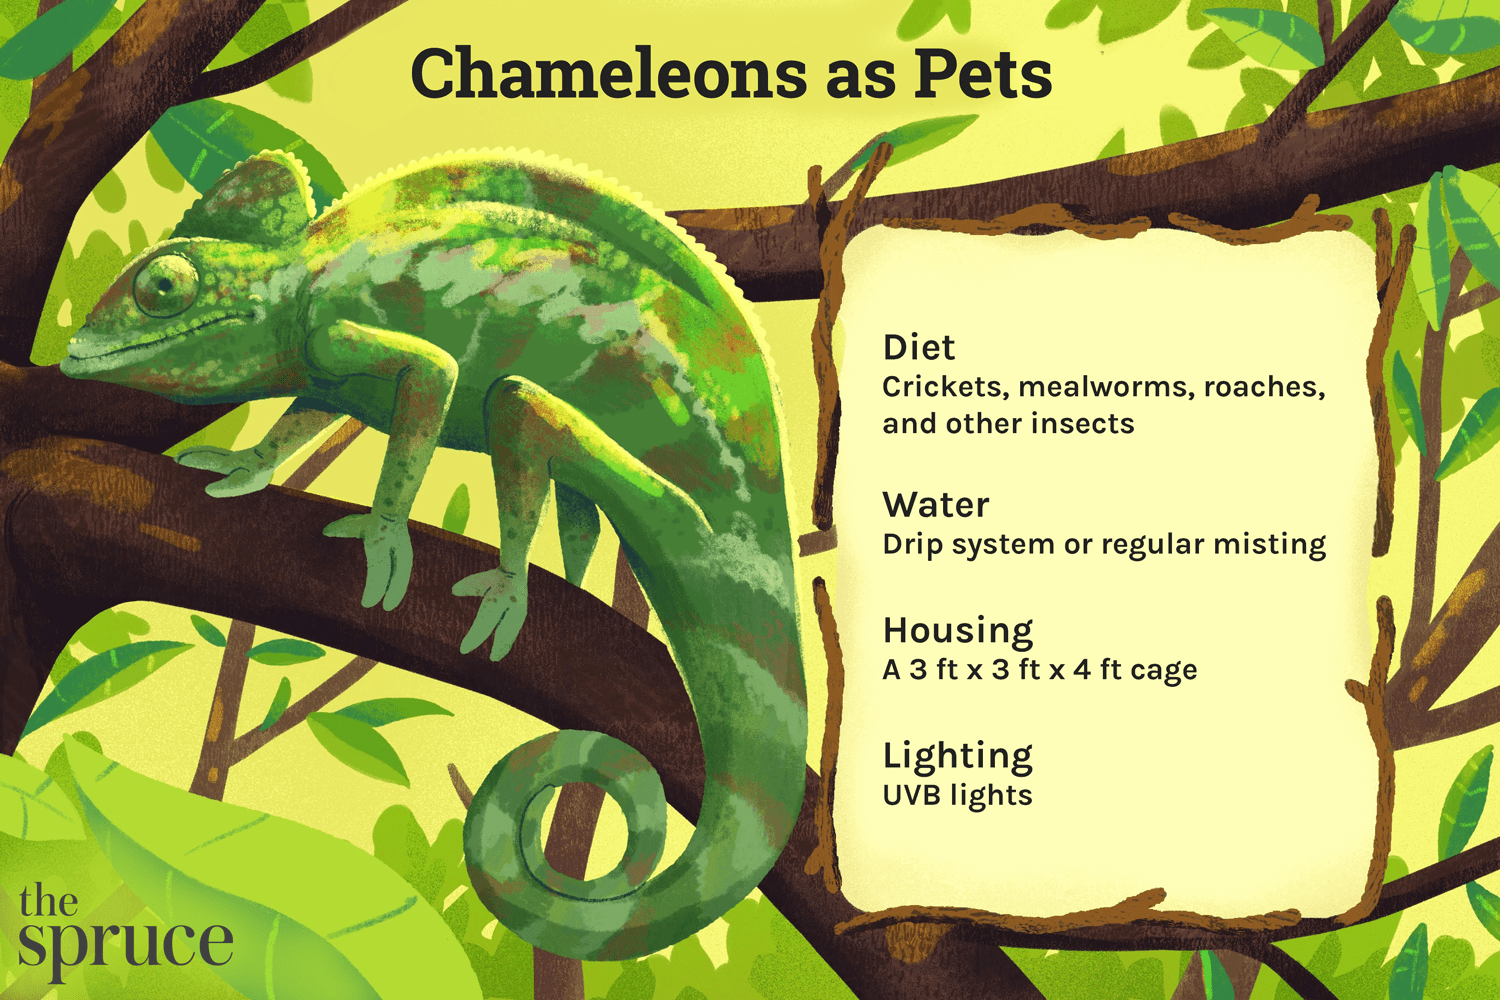 How to Take Care of a Chameleon for Beginners?